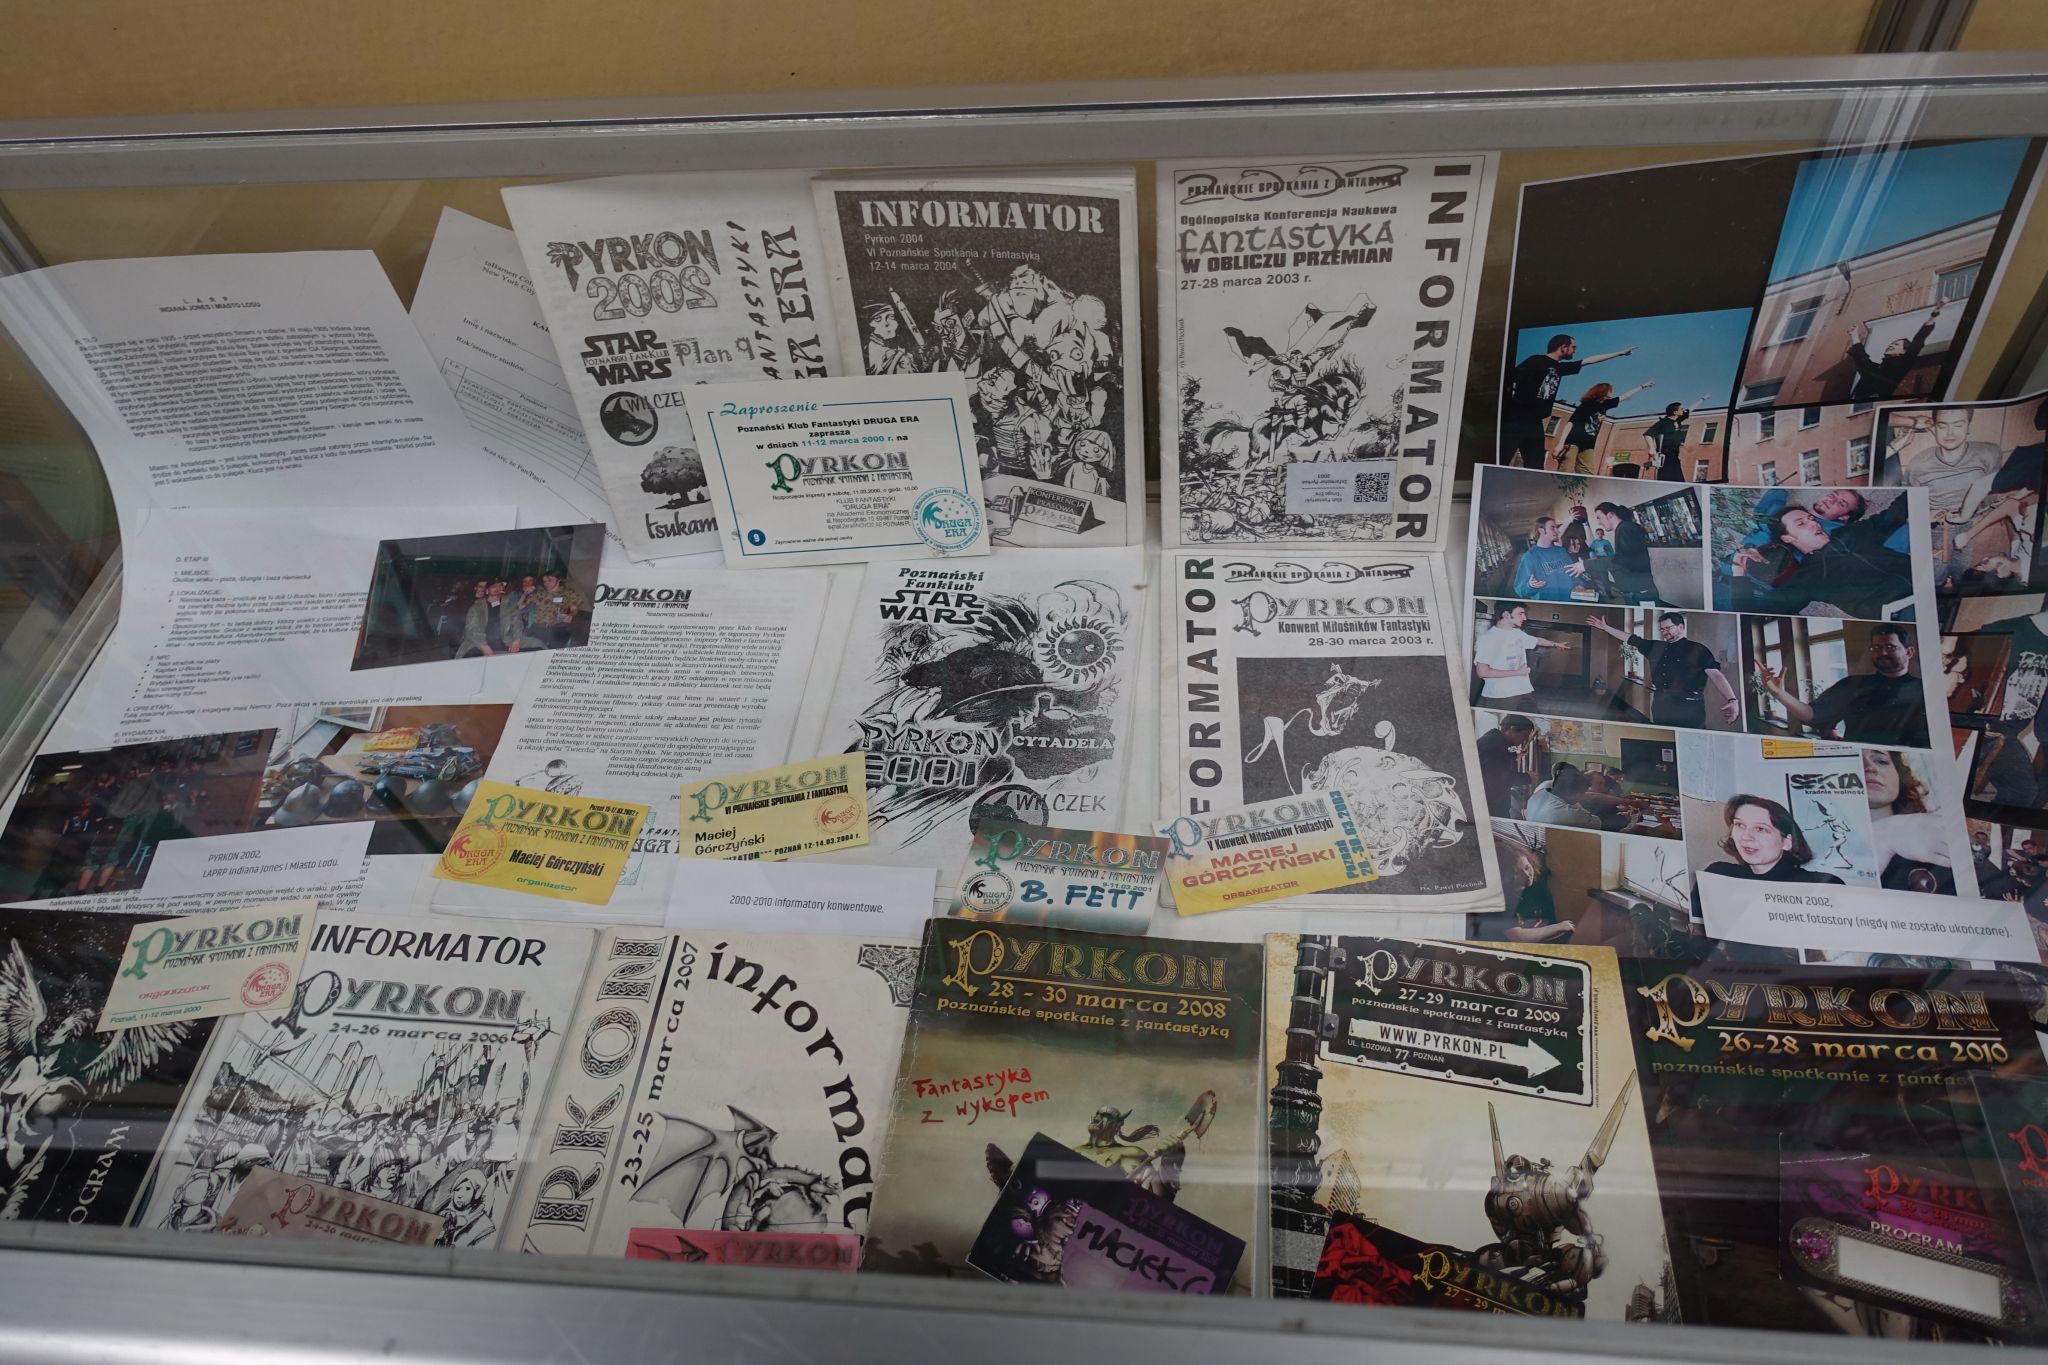 Picture showing some programme books, badges, pictures, and other memorabilia from the past conventions.